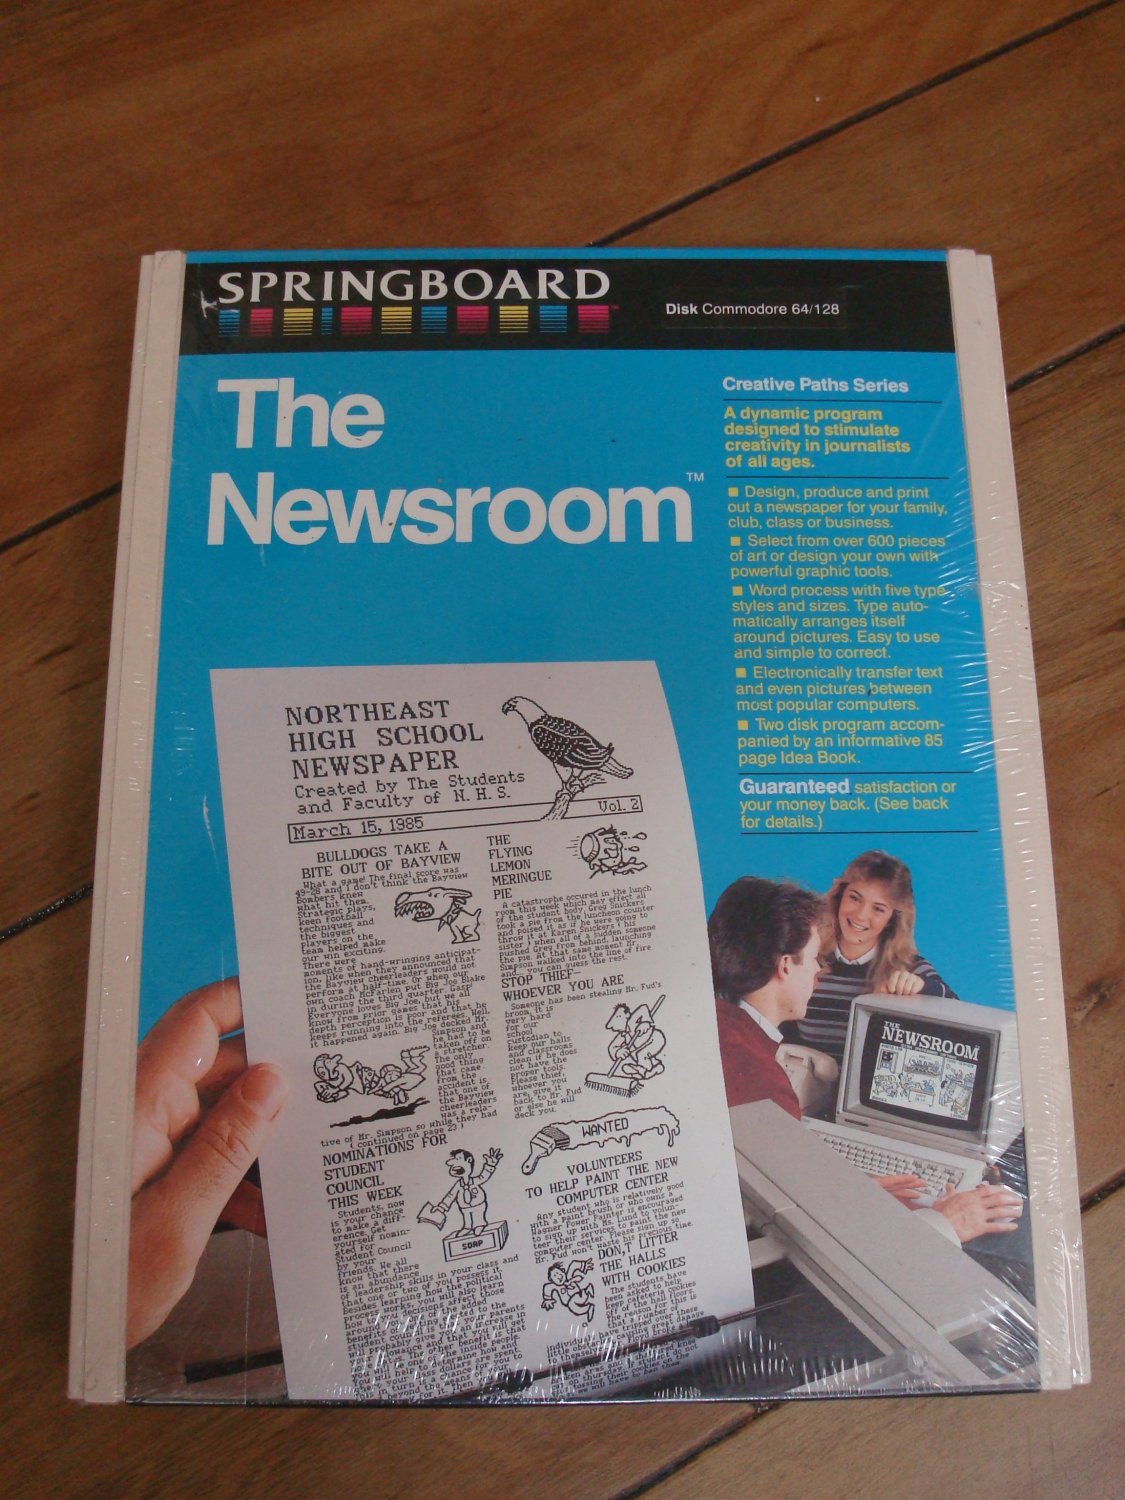 The Newsroom For Commodore 64 128 In Hard Case, NEW FACTORY SEALED, Springboard